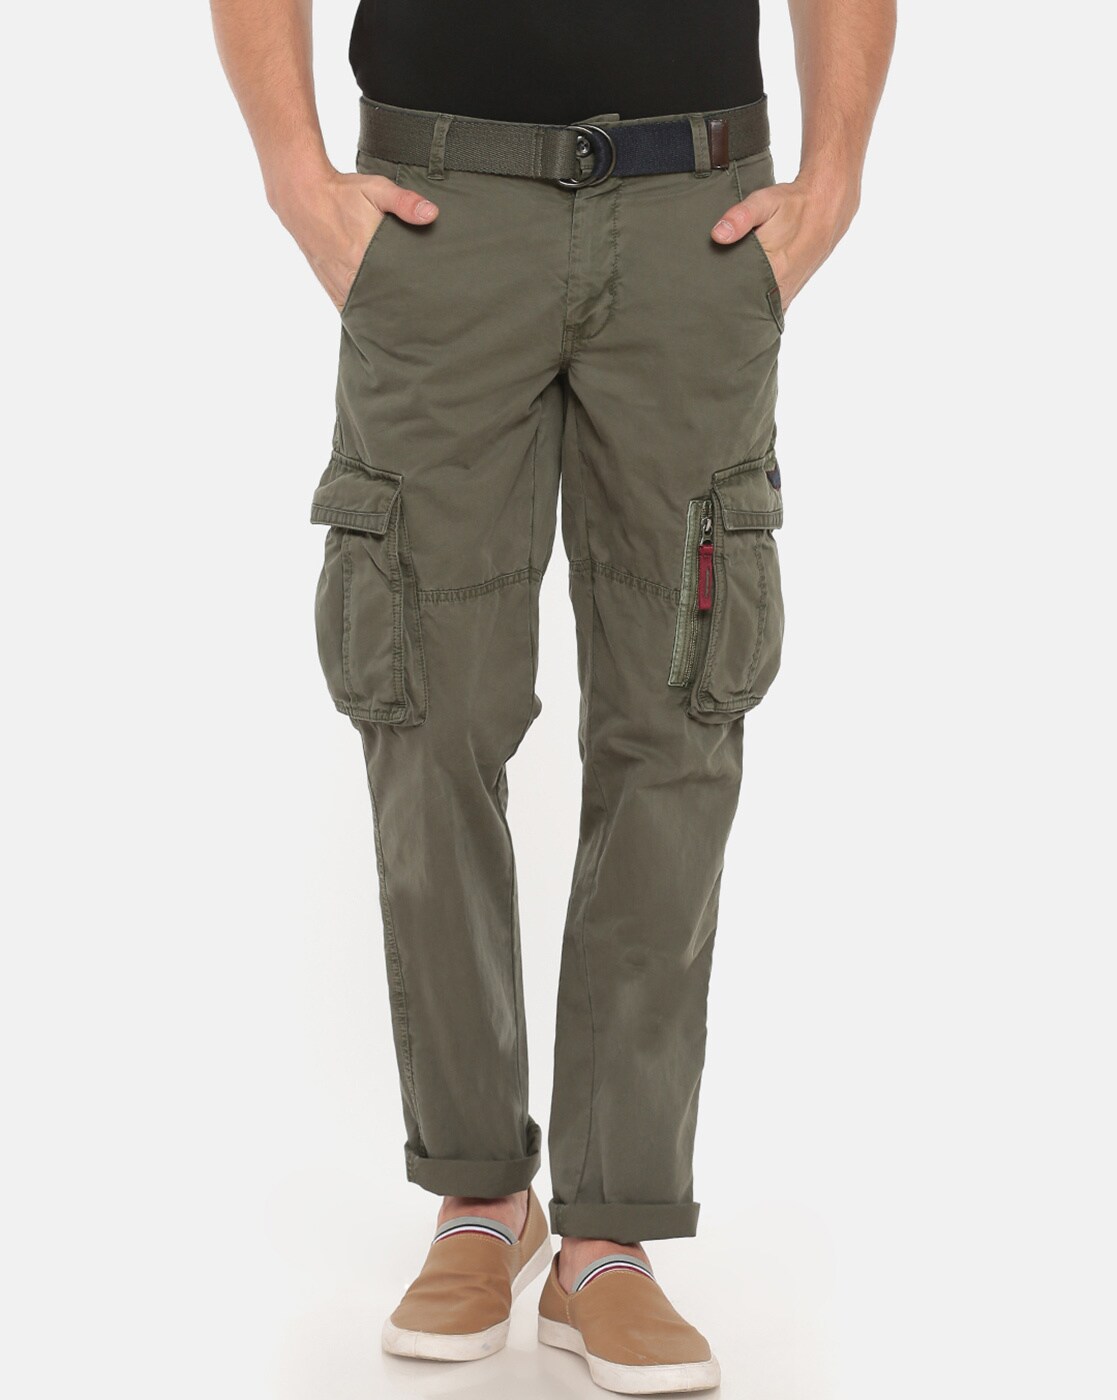 Buy Olive Trousers & Pants for Women by iVOC Online | Ajio.com